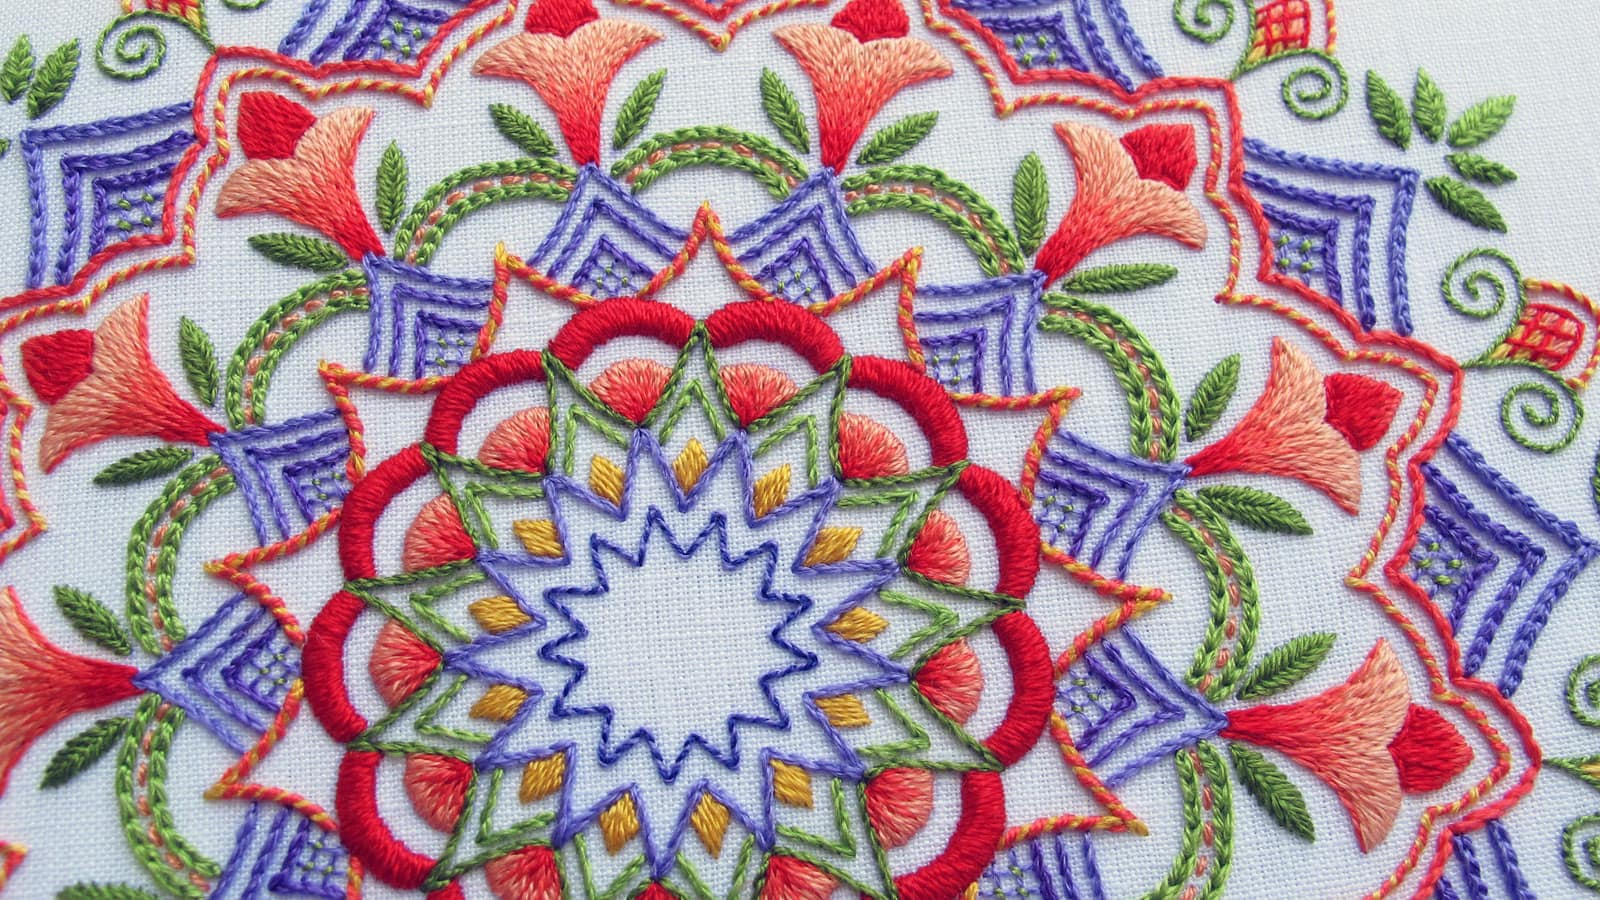 Japanese Embroidery Patterns Free Needlenthread Tips Tricks And Great Resources For Hand Embroidery